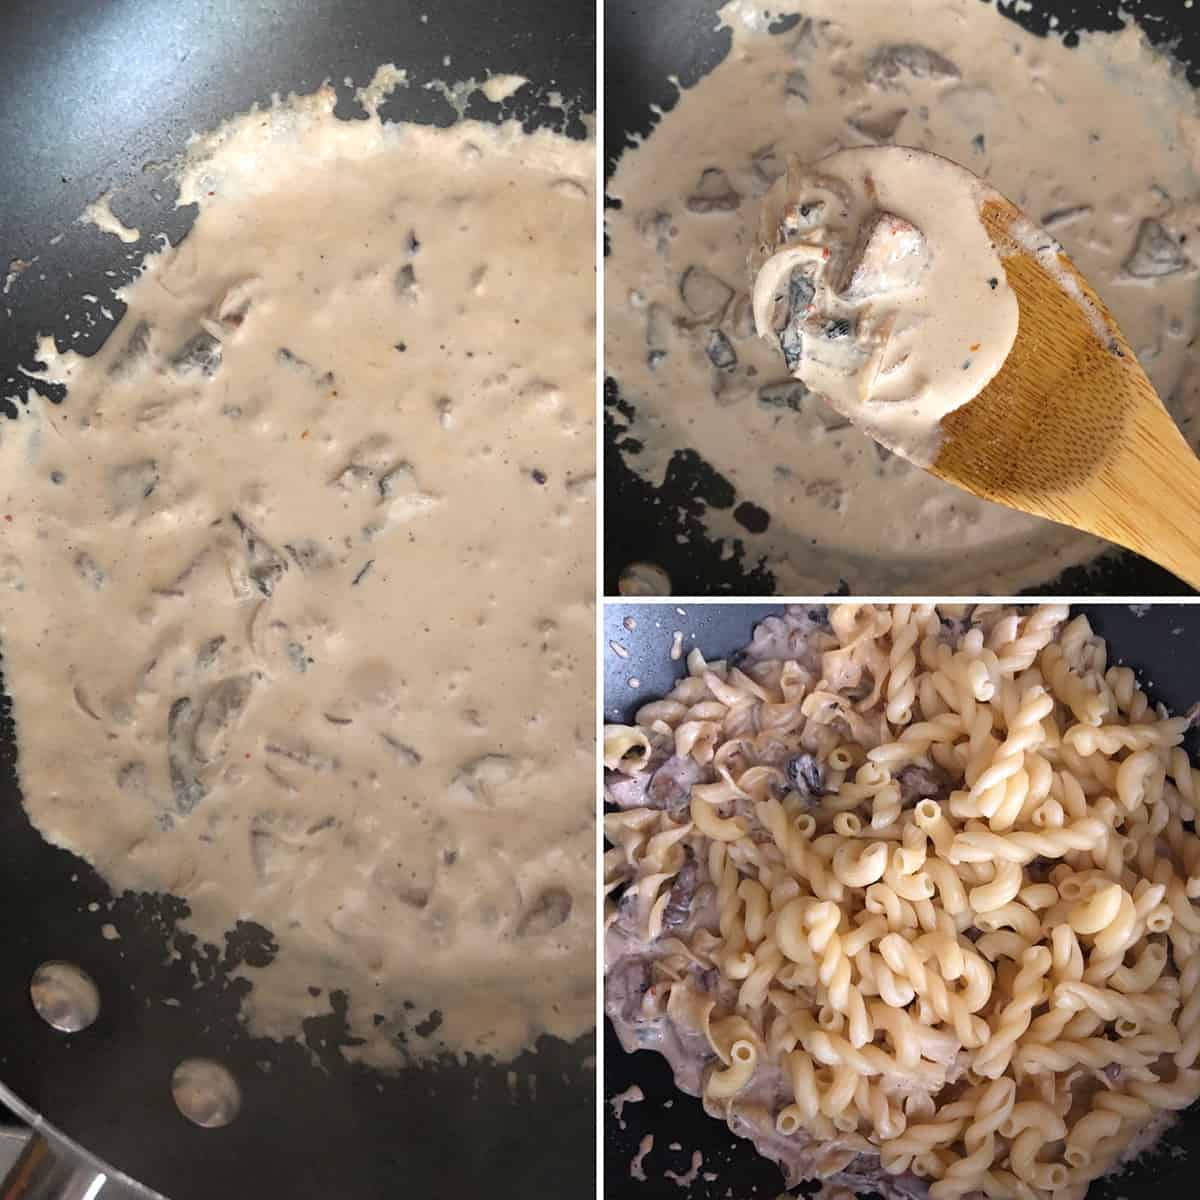 Photos showing thickened cream and pasta